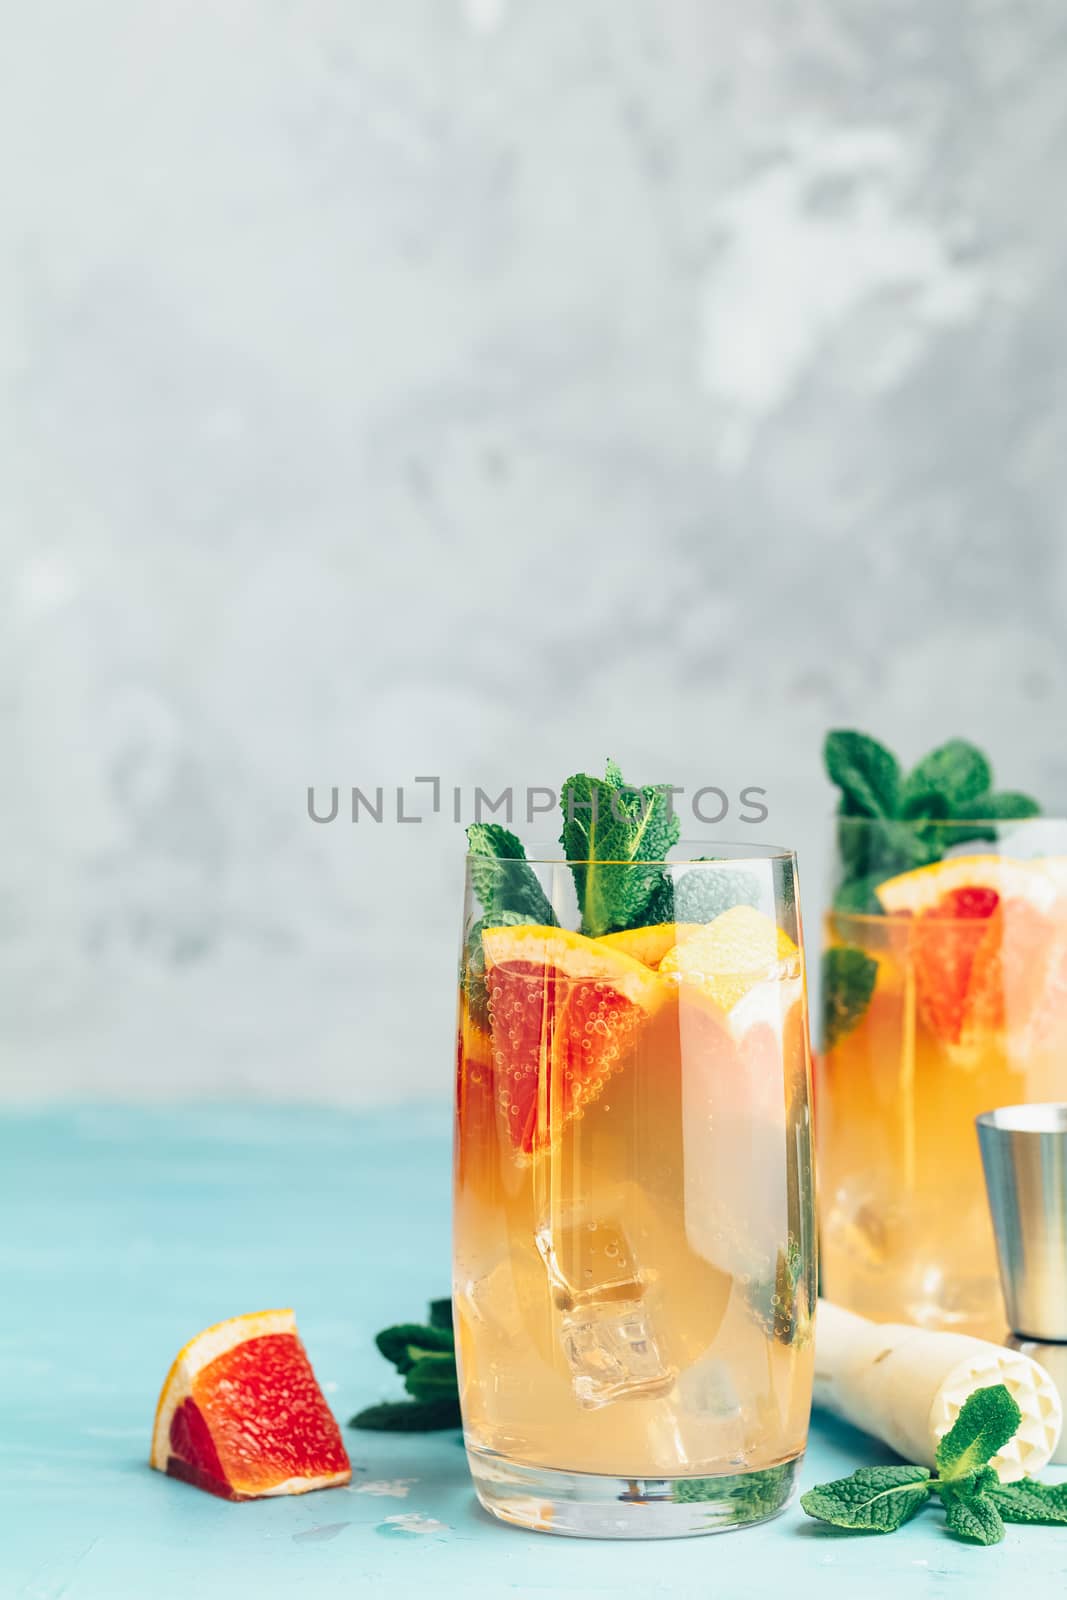 Grapefruit and fresh mint cocktail with juice by ArtSvitlyna